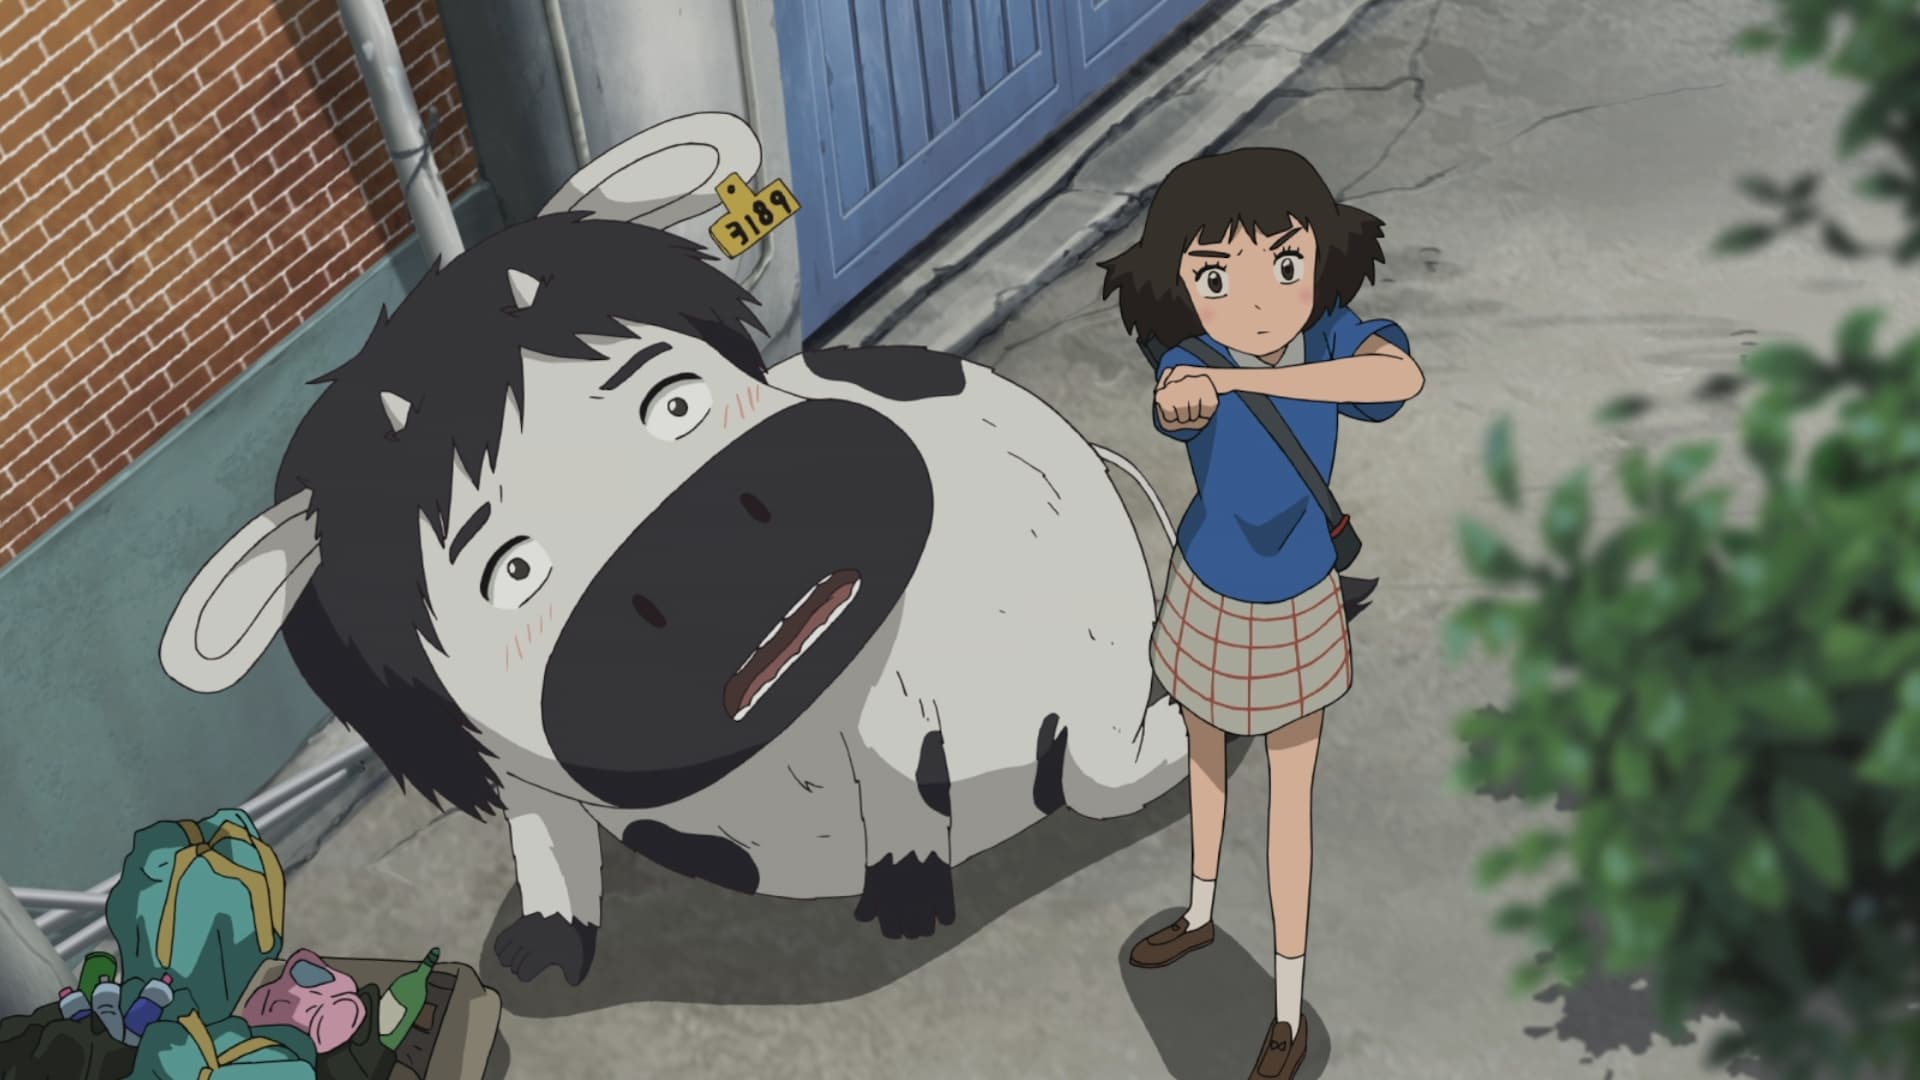 The Satellite Girl and Milk Cow (2014)